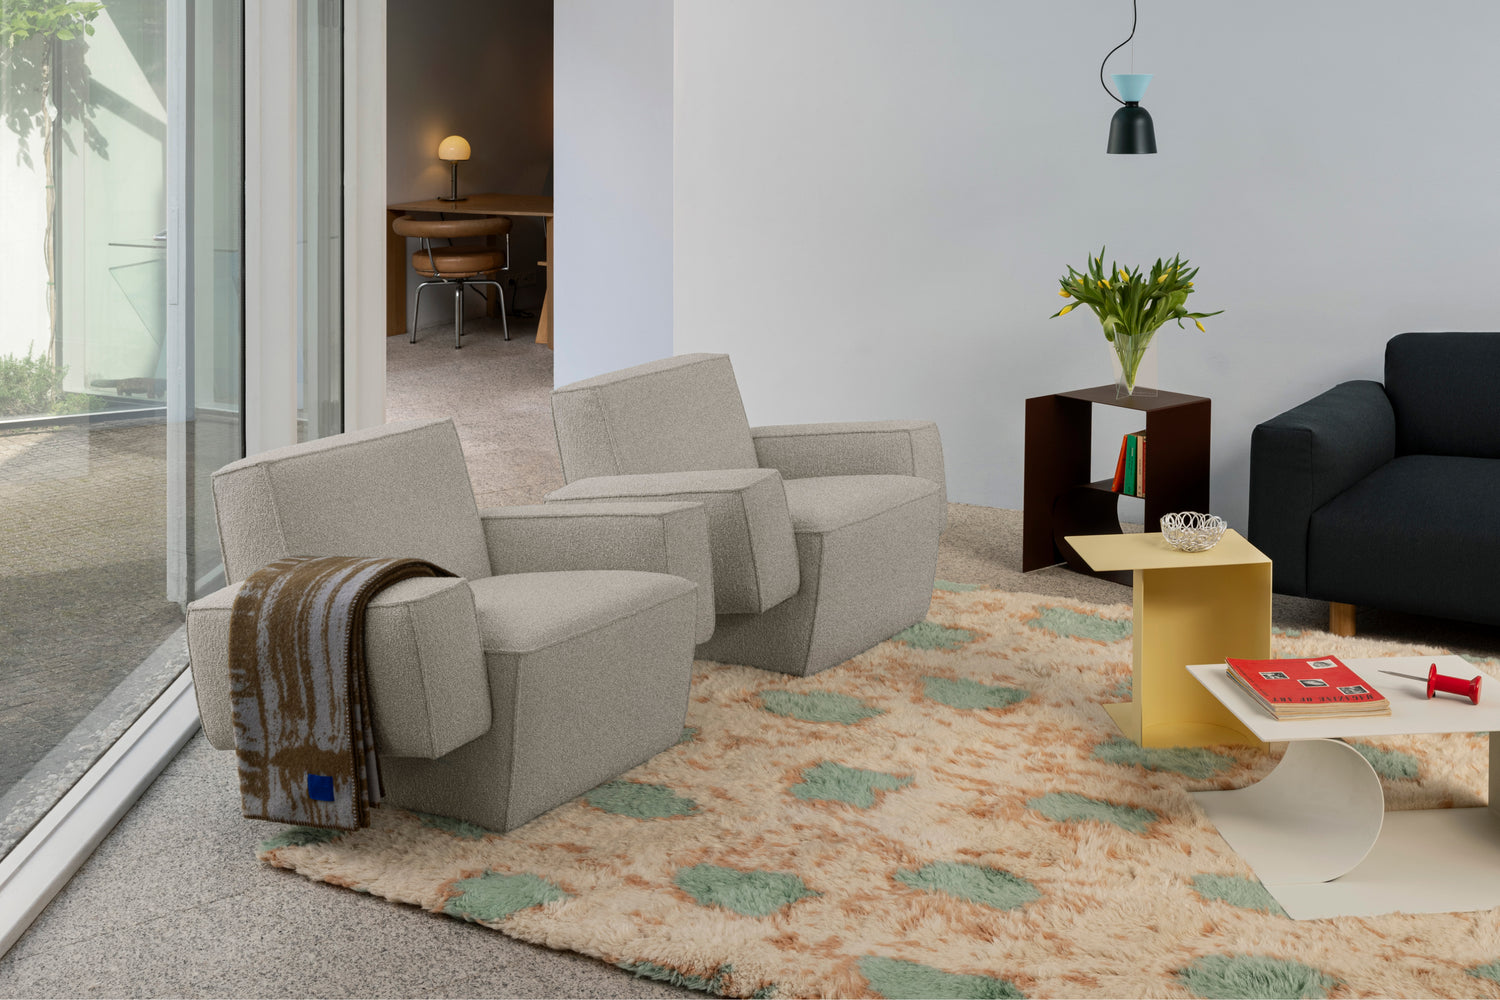 A lifestyle image of a living room / lounge scene featuring Hunk Lounge Chair with Armrests, Glitch Throw, Monster Rug, Alphabeta Pendant Light, and Glyph Side Tables.